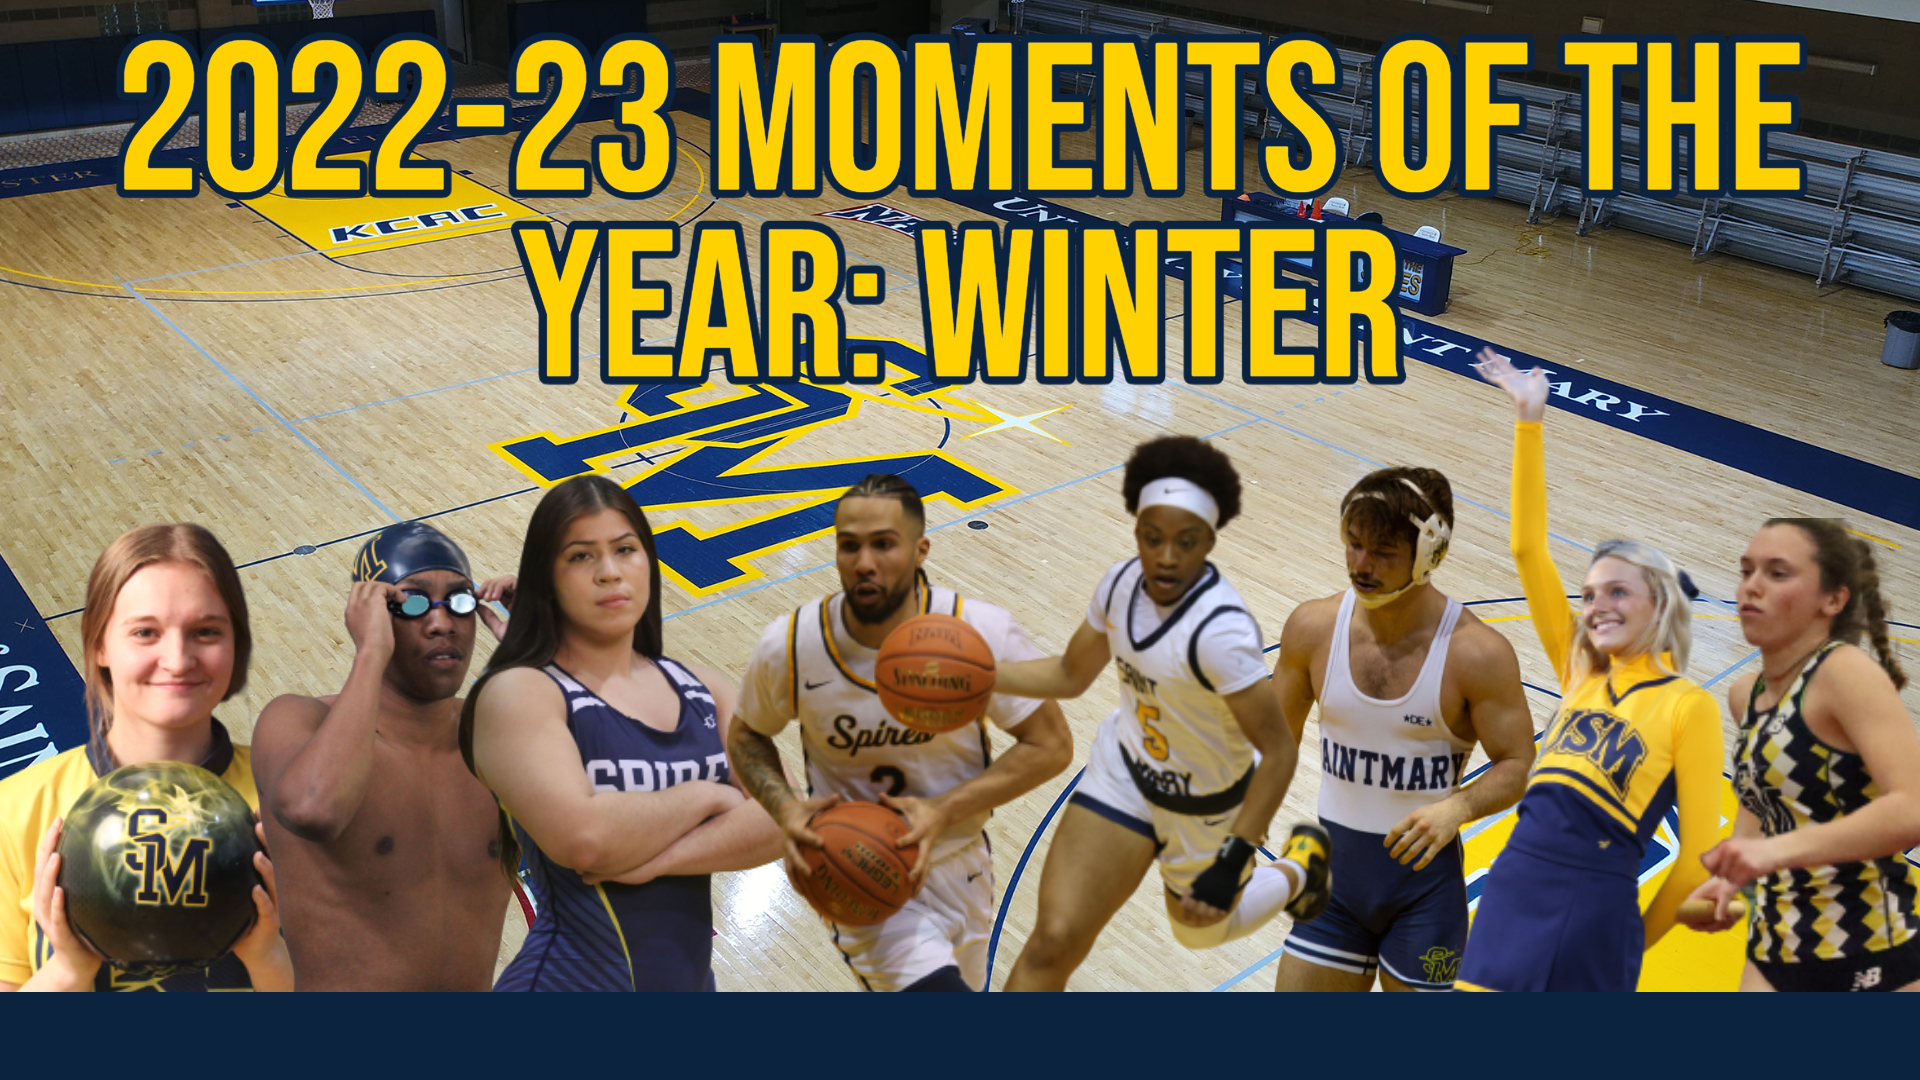 2022-23 Moments of the Year: Winter